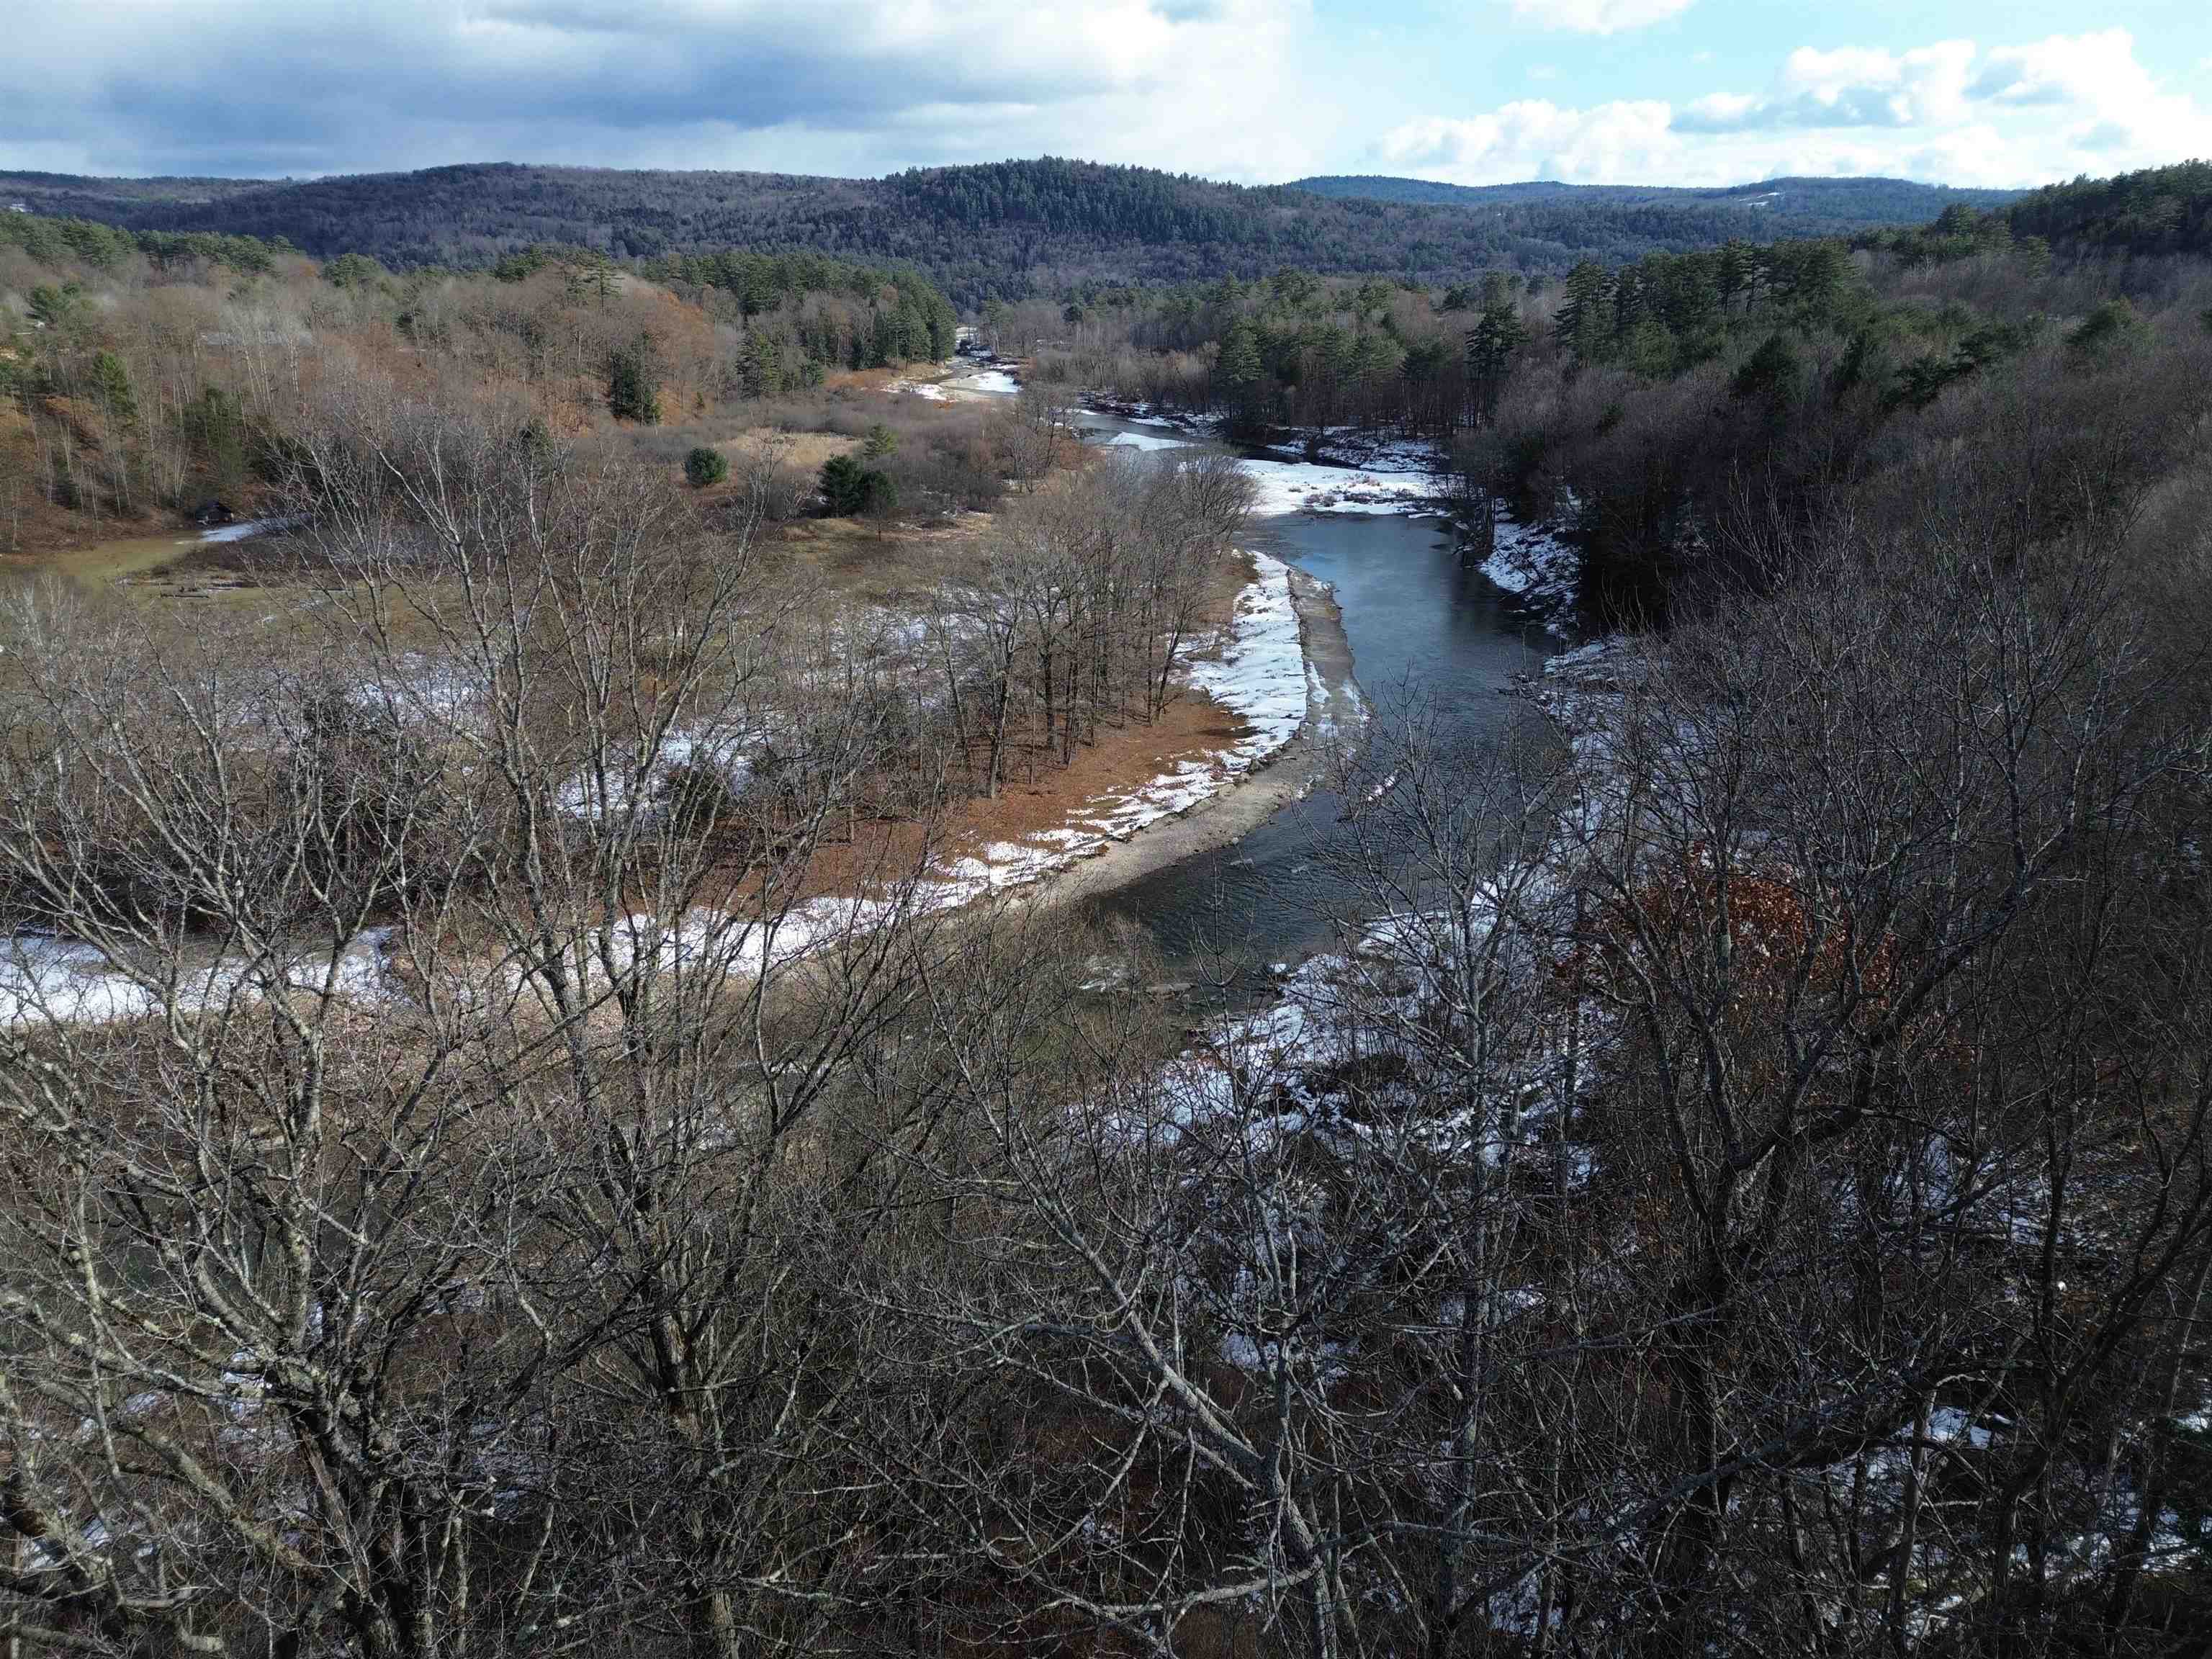 View of the Black River